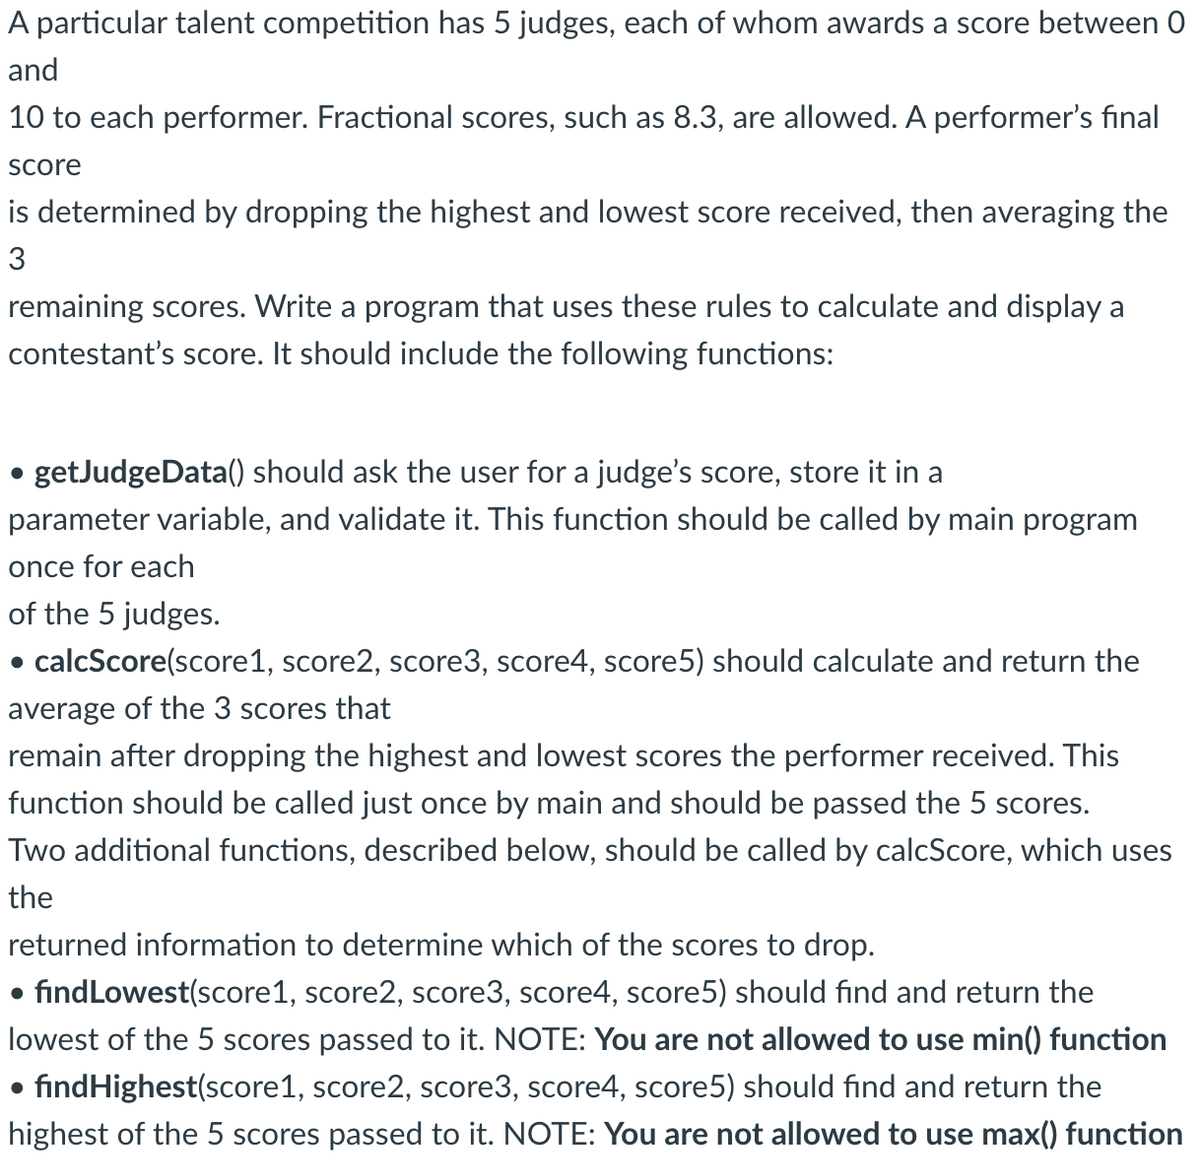 A particular talent competition has 5 judges, each of whom awards a score between 0
and
10 to each performer. Fractional scores, such as 8.3, are allowed. A performer's final
score
is determined by dropping the highest and lowest score received, then averaging the
3
remaining scores. Write a program that uses these rules to calculate and display a
contestant's score. It should include the following functions:
getJudgeData() should ask the user for a judge's score, store it in a
parameter variable, and validate it. This function should be called by main program
once for each
of the 5 judges.
calcScore(score1, score2, score3, score4, score5) should calculate and return the
average of the 3 scores that
remain after dropping the highest and lowest scores the performer received. This
function should be called just once by main and should be passed the 5 scores.
Two additional functions, described below, should be called by calcScore, which uses
the
●
●
returned information to determine which of the scores to drop.
find Lowest(score1, score2, score3, score4, score5) should find and return the
lowest of the 5 scores passed to it. NOTE: You are not allowed to use min() function
findHighest(score1, score2, score3, score4, score5) should find and return the
highest of the 5 scores passed to it. NOTE: You are not allowed to use max() function